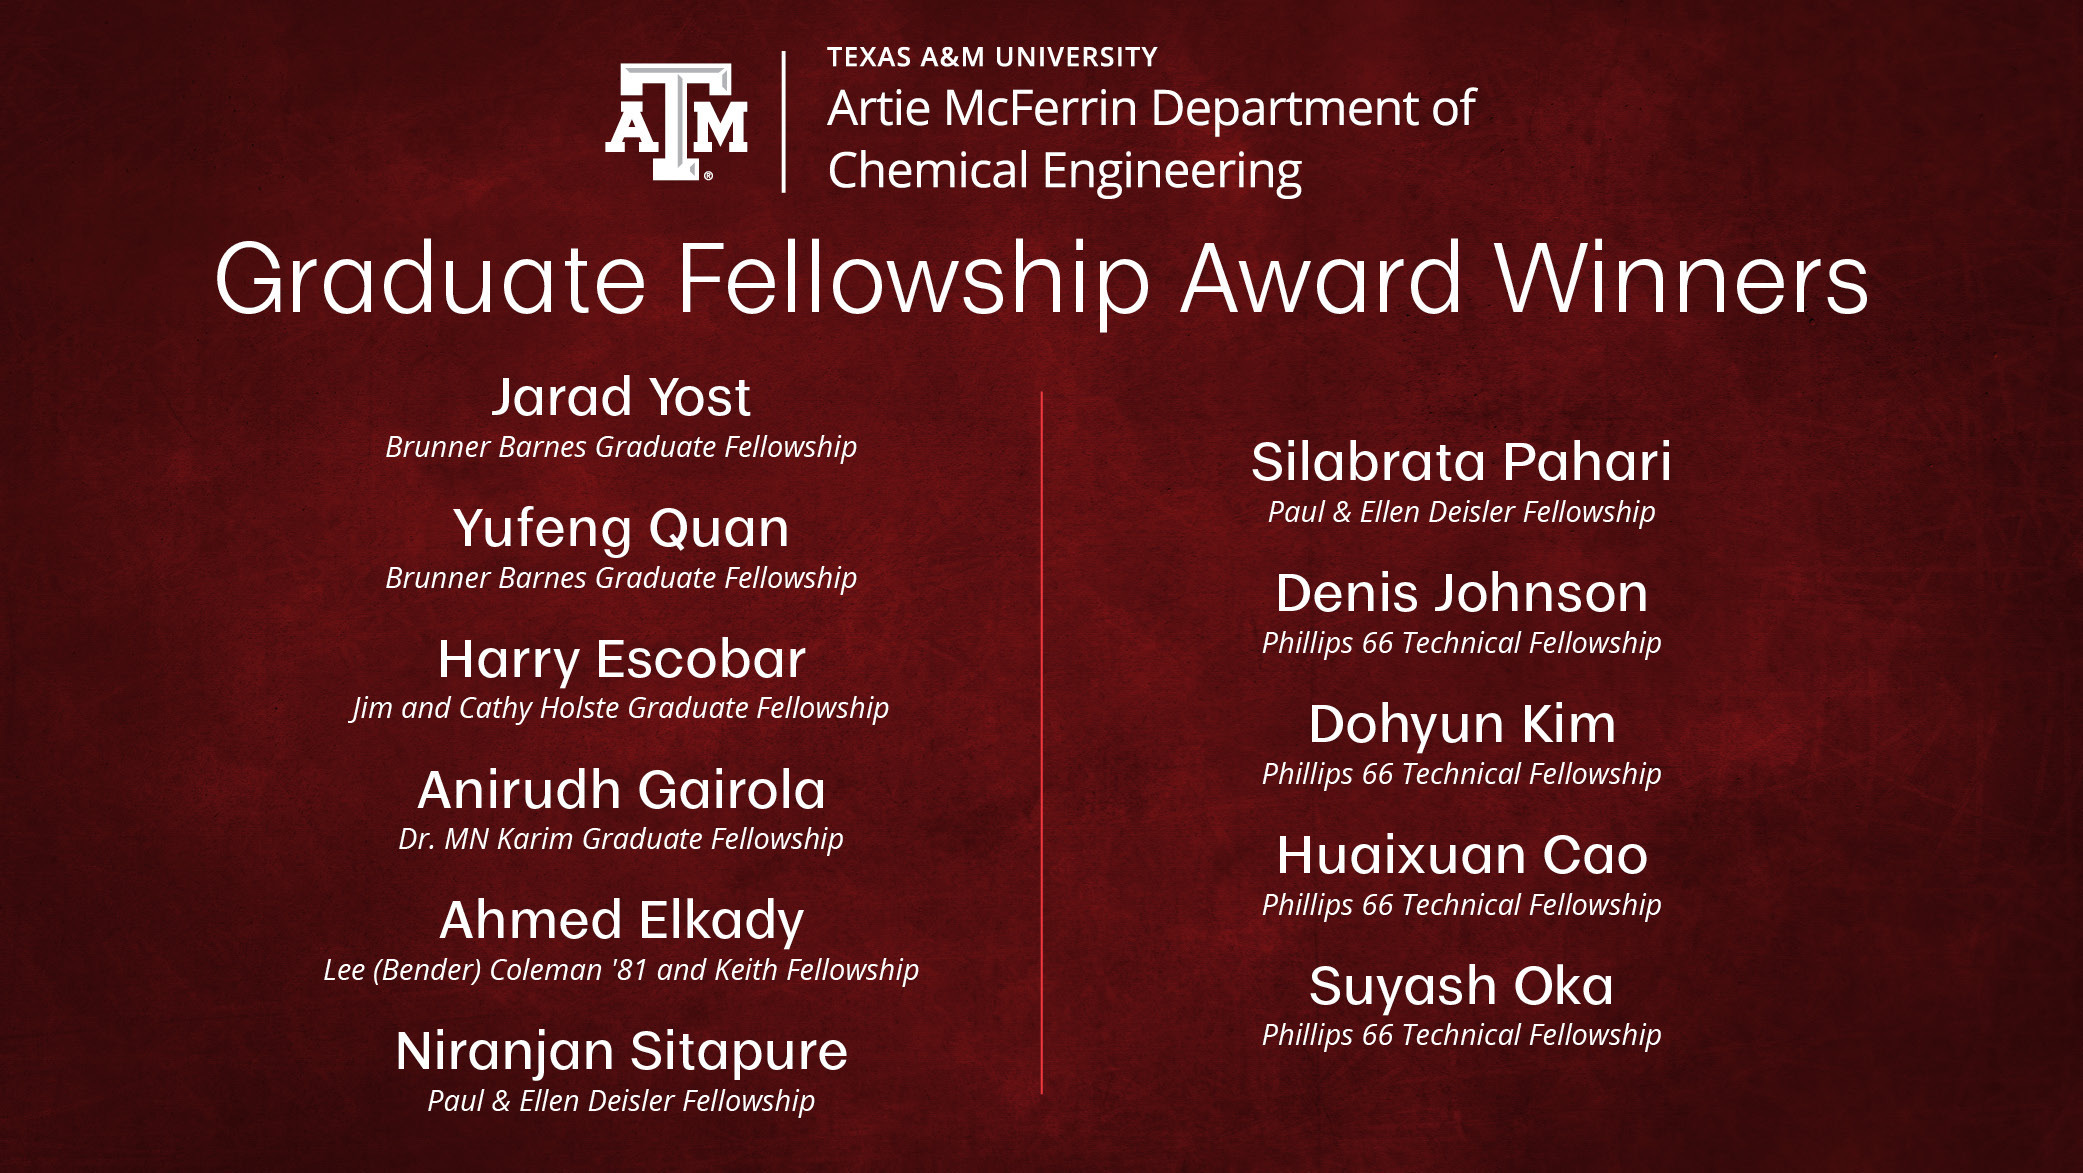 List of names included in the fellowship saying “Graduate Fellowship Award Winners.” Names include Jarad Yost and Yufeng Quan for the Brunner Barns Graduate Fellowship; Harry Escobar for the Jim and Cathy Holste Graduate Fellowship; Anirudh Gairola for the Dr. MN Karim Graduate Fellowship; Ahmed Elkady for the Lee (Bender) Coleman ’81 and Keith Fellowship; Niranjan Sitapure and Silabrata Pahari for the Paul &amp; Ellen Deisler Fellowship; and Denis Johnson, Dohyun Kim, Huaixuan Cao and Suyash Oka for the Phillips 66 Technical Fellowship.